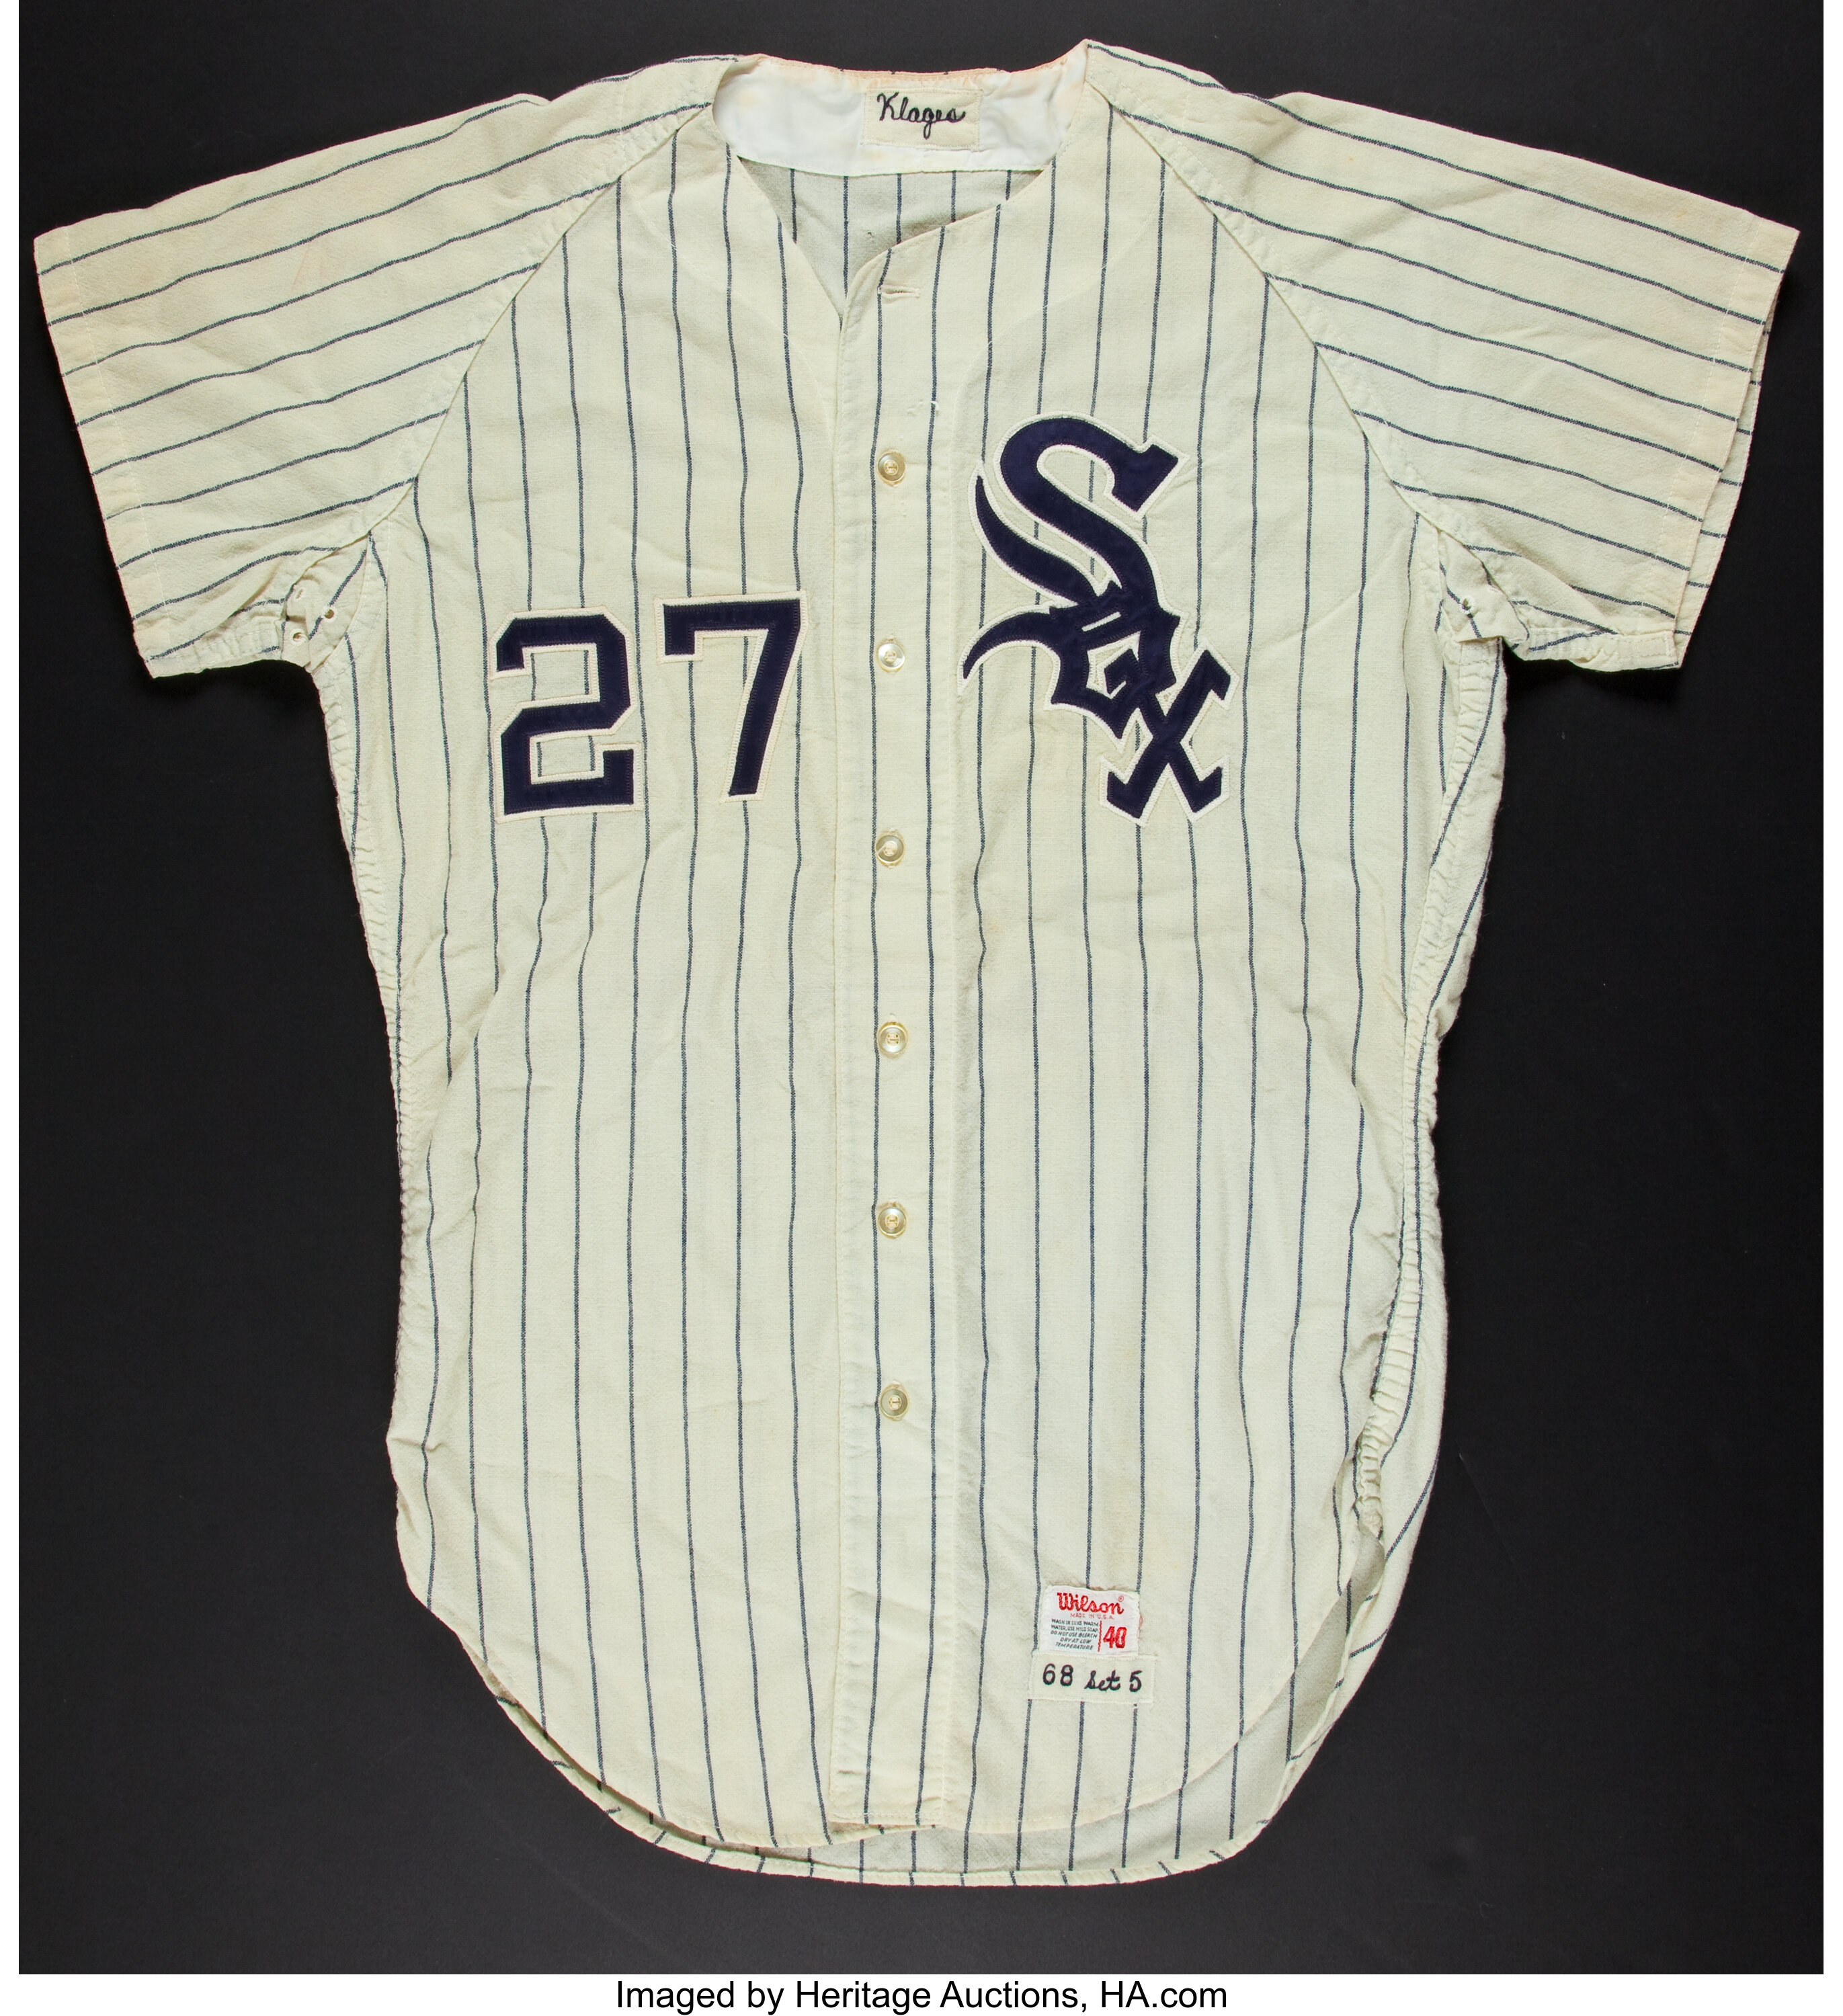 1968 Fred Klages Game Worn White Sox Flannel Jersey. Baseball, Lot  #42102